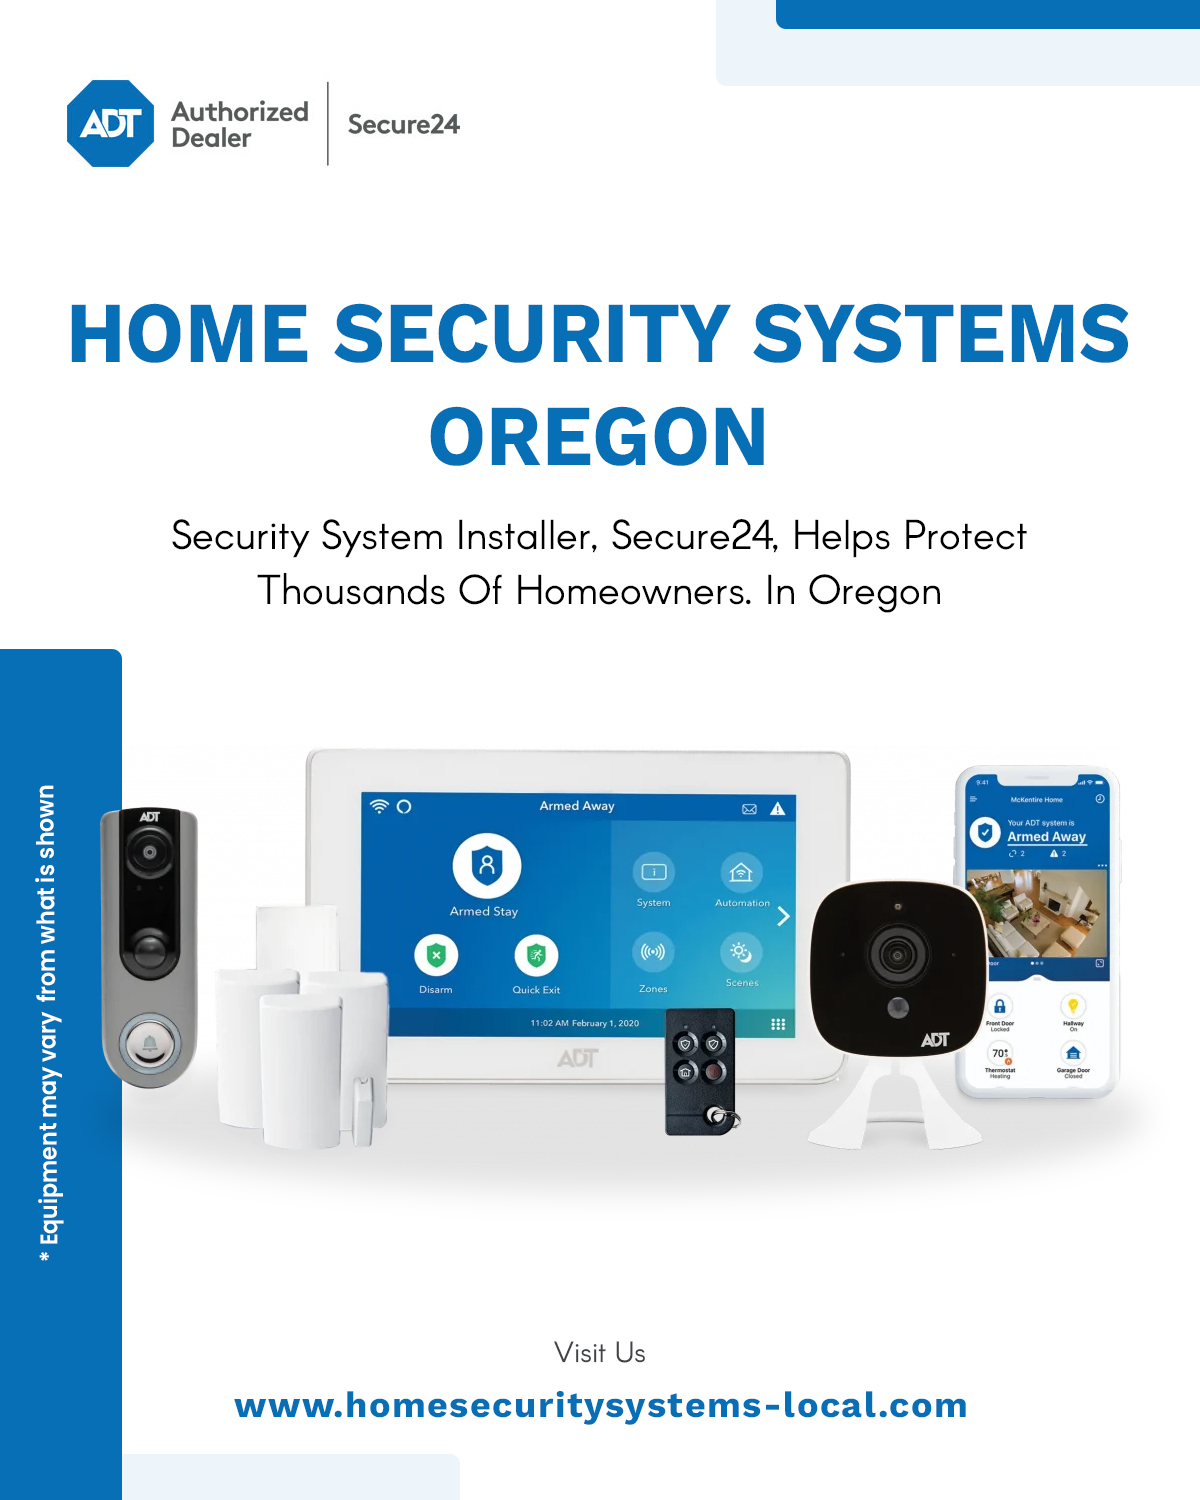 High Quality Trusted Leader In Home Security Systems In Oregon | Home Securit Blank Meme Template